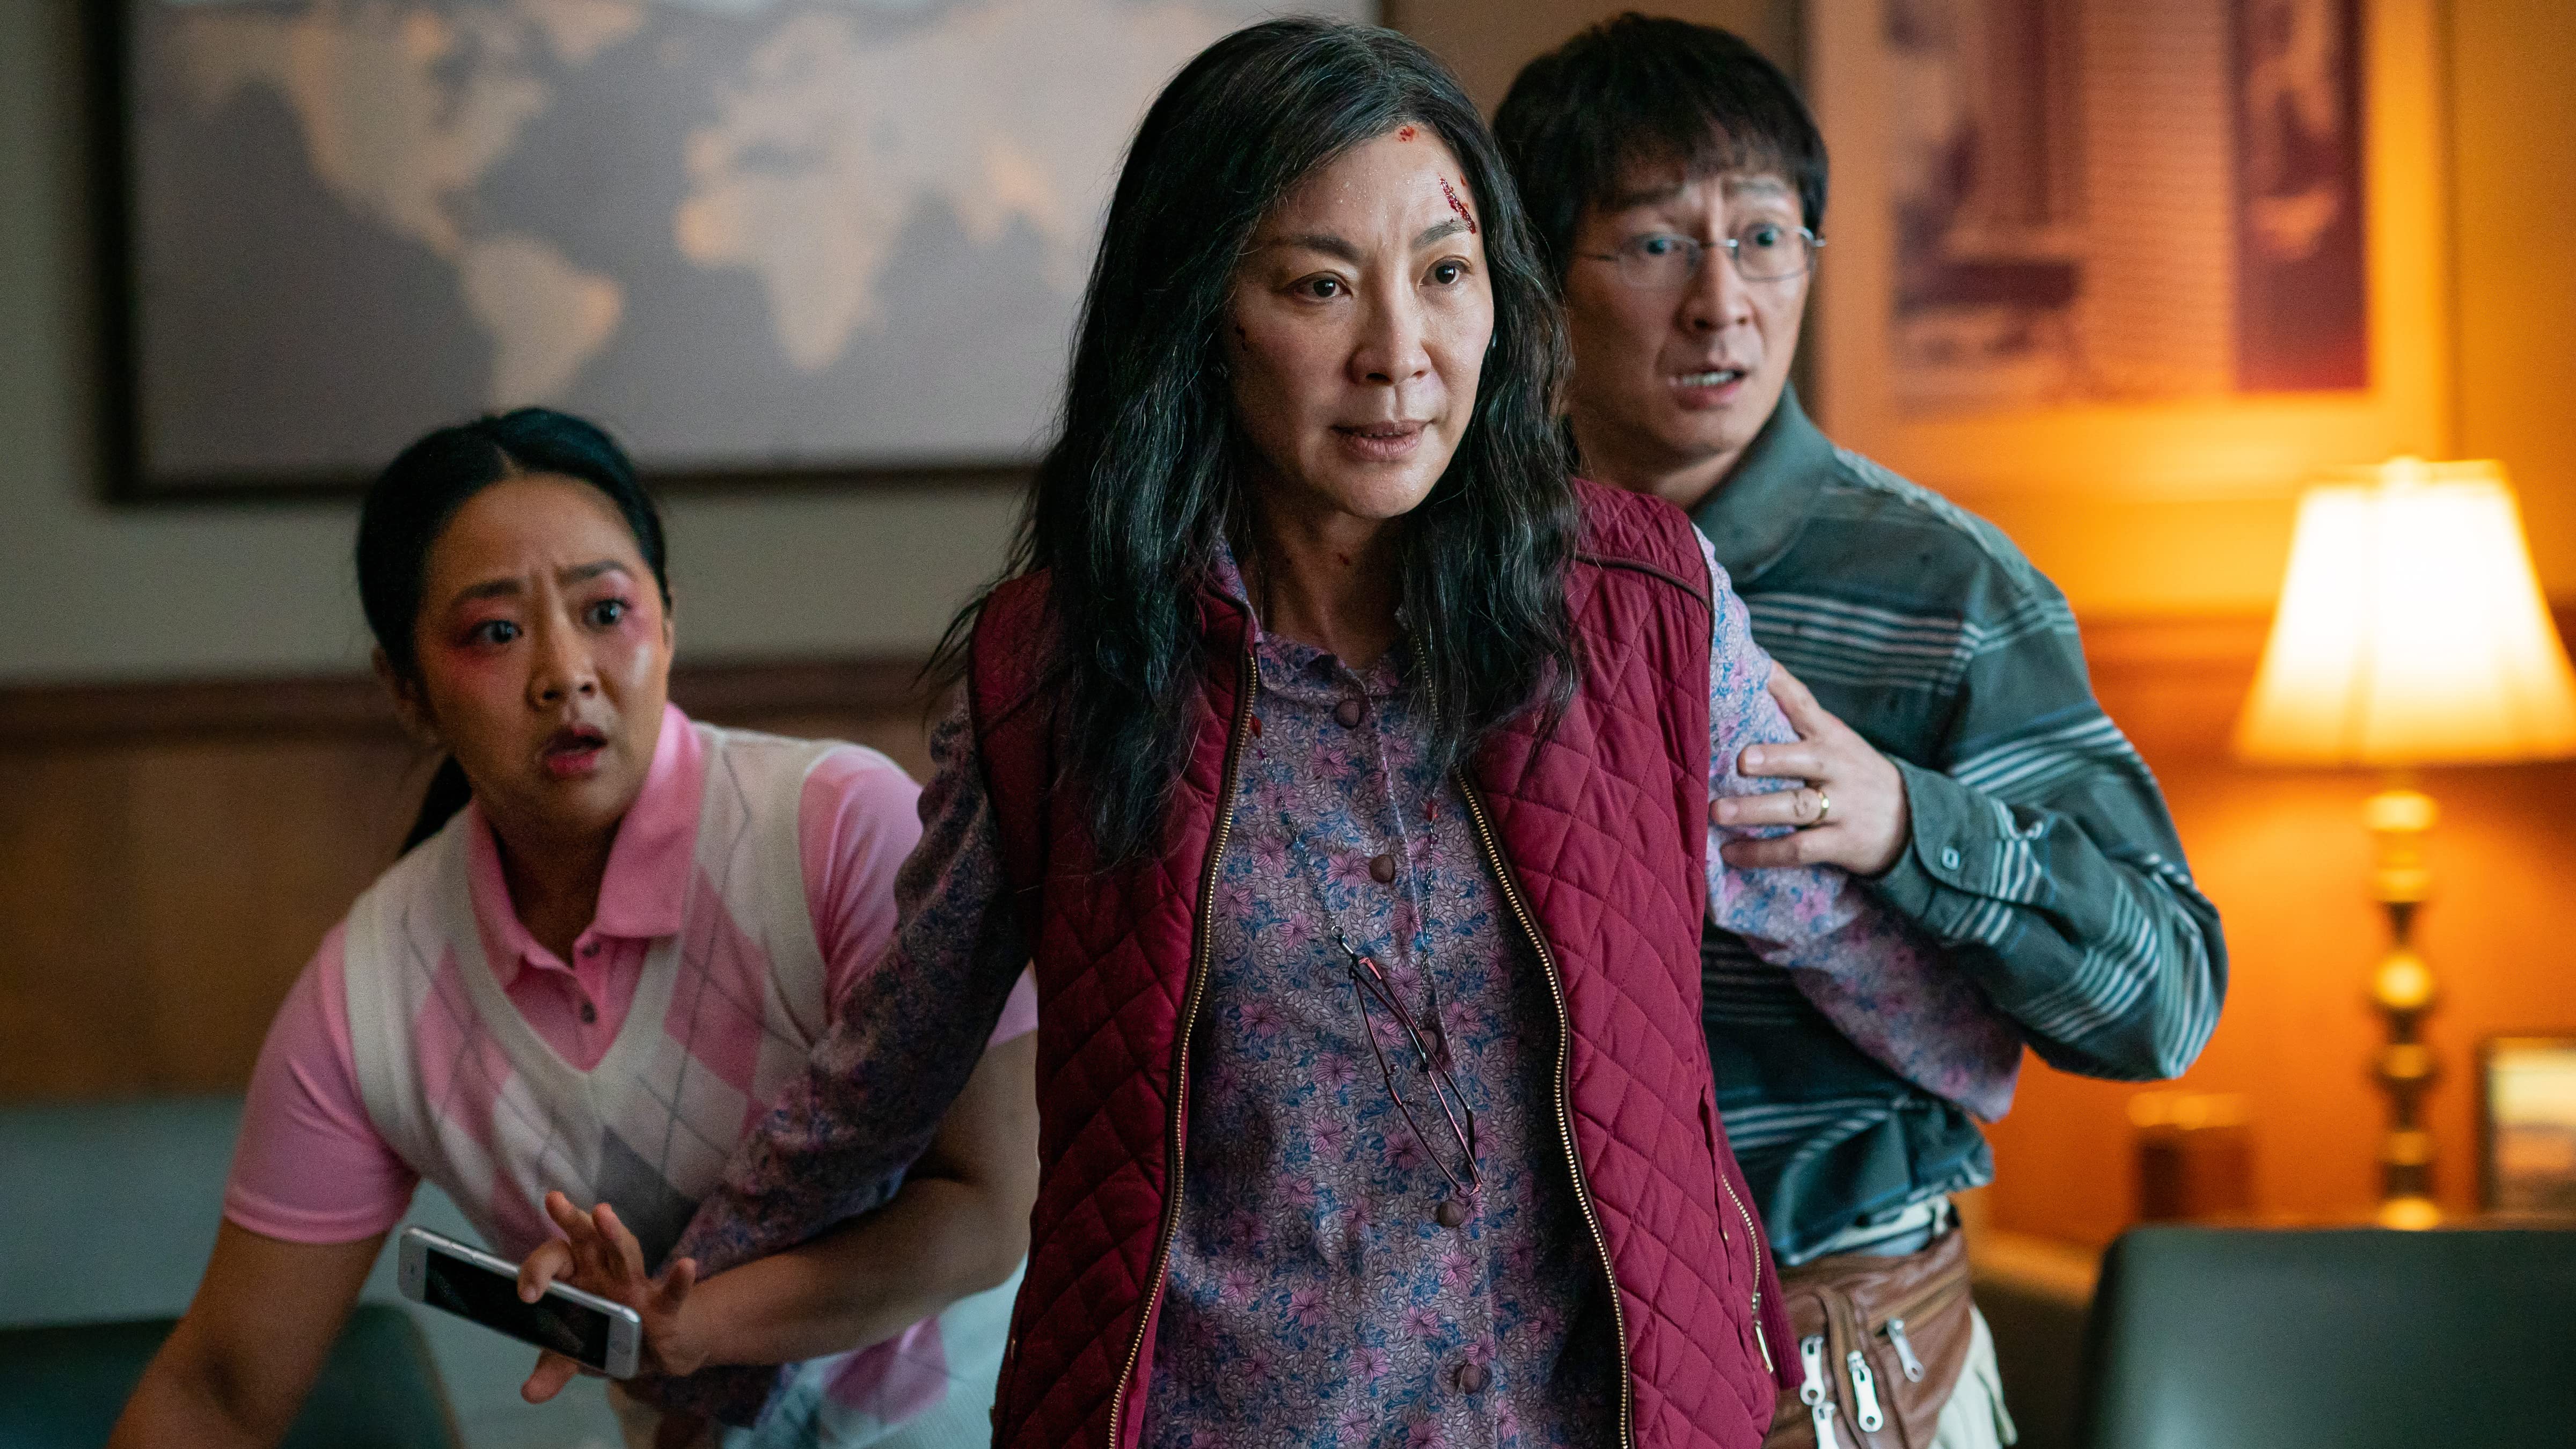 Image of Stephanie Hsu (Joy), Michelle Yeoh (Evelyn), and Ke Huy Quan (Waymond) in 'Everything, Everywhere, All at Once.' Evelyn is in the foreground with her arms out on either side to protect Joy and Waymond. Evelyn has long, black hair, and is wearing a maroon quilted vest over a purplish flower-print shirt. Joy cowers behind her on the right, holding her phone. Her long, dark hair is in a ponytail, and she's wearing a pink polo shirt under a pink, plaid pullover. Waymond is on Evelyn's right wearing a striped, green button-down and a brown fanny pack. He's wearing glasses and his dark hair is short.